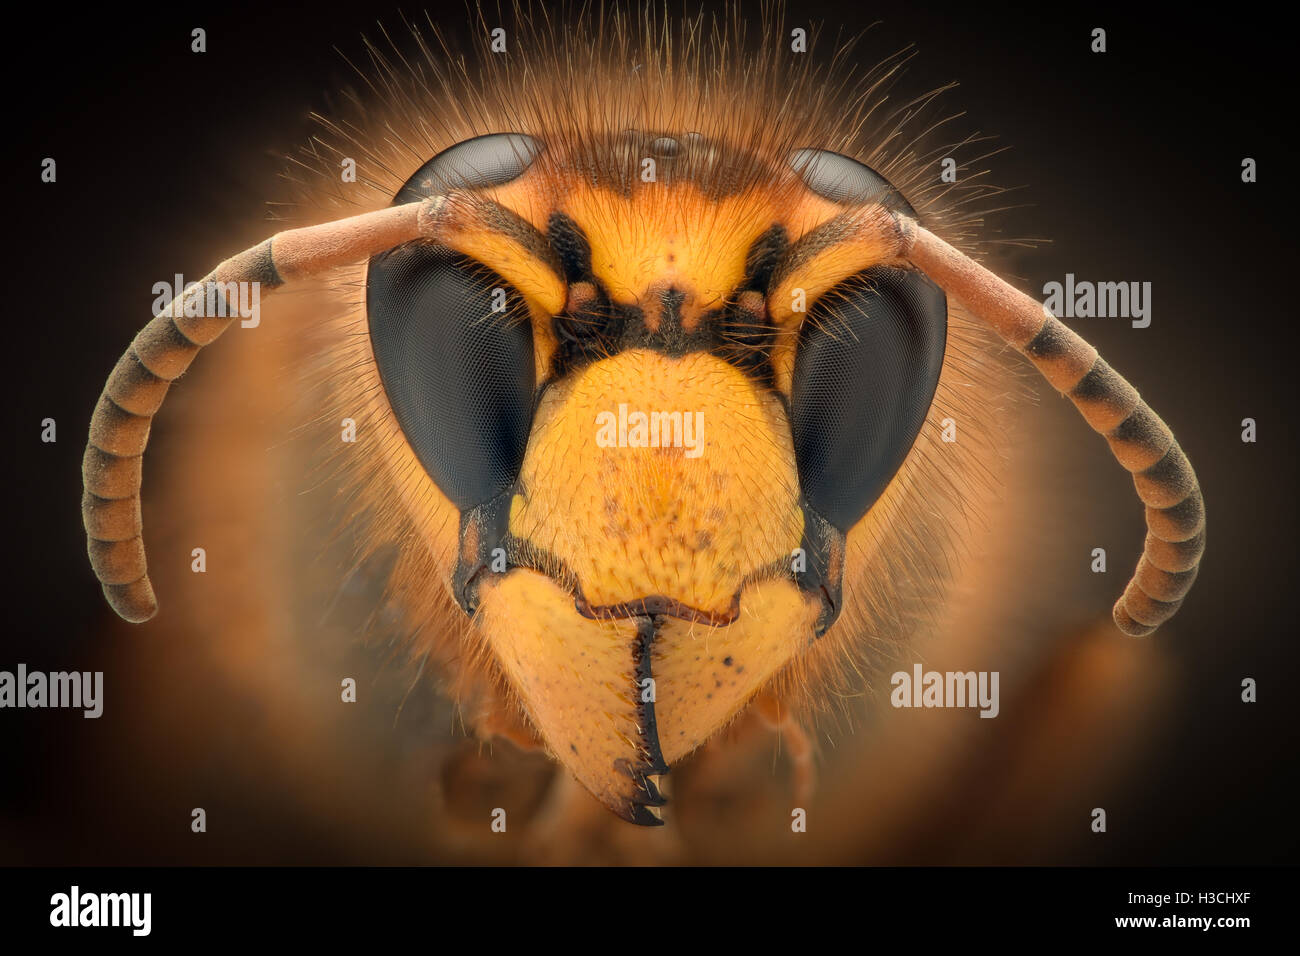 Extreme magnification - Giant Wasp Stock Photo